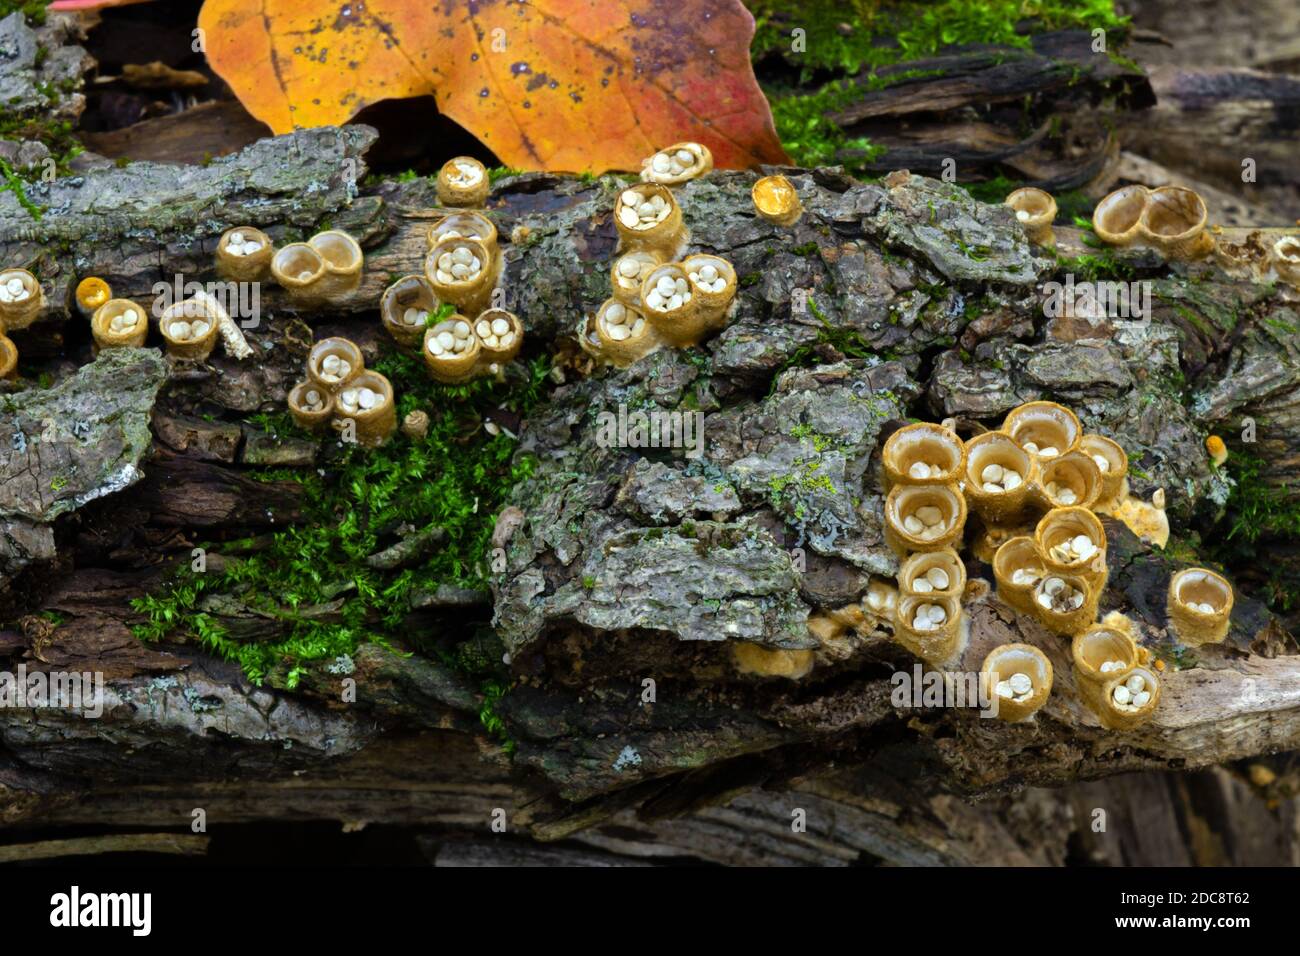 White-egg Bird’s Nest Fungus growing on decaying wood in Pennsylvania’s Pocono Mountains. Each “nest” averages 5 to 10mm across and up to 10mm high. Stock Photo